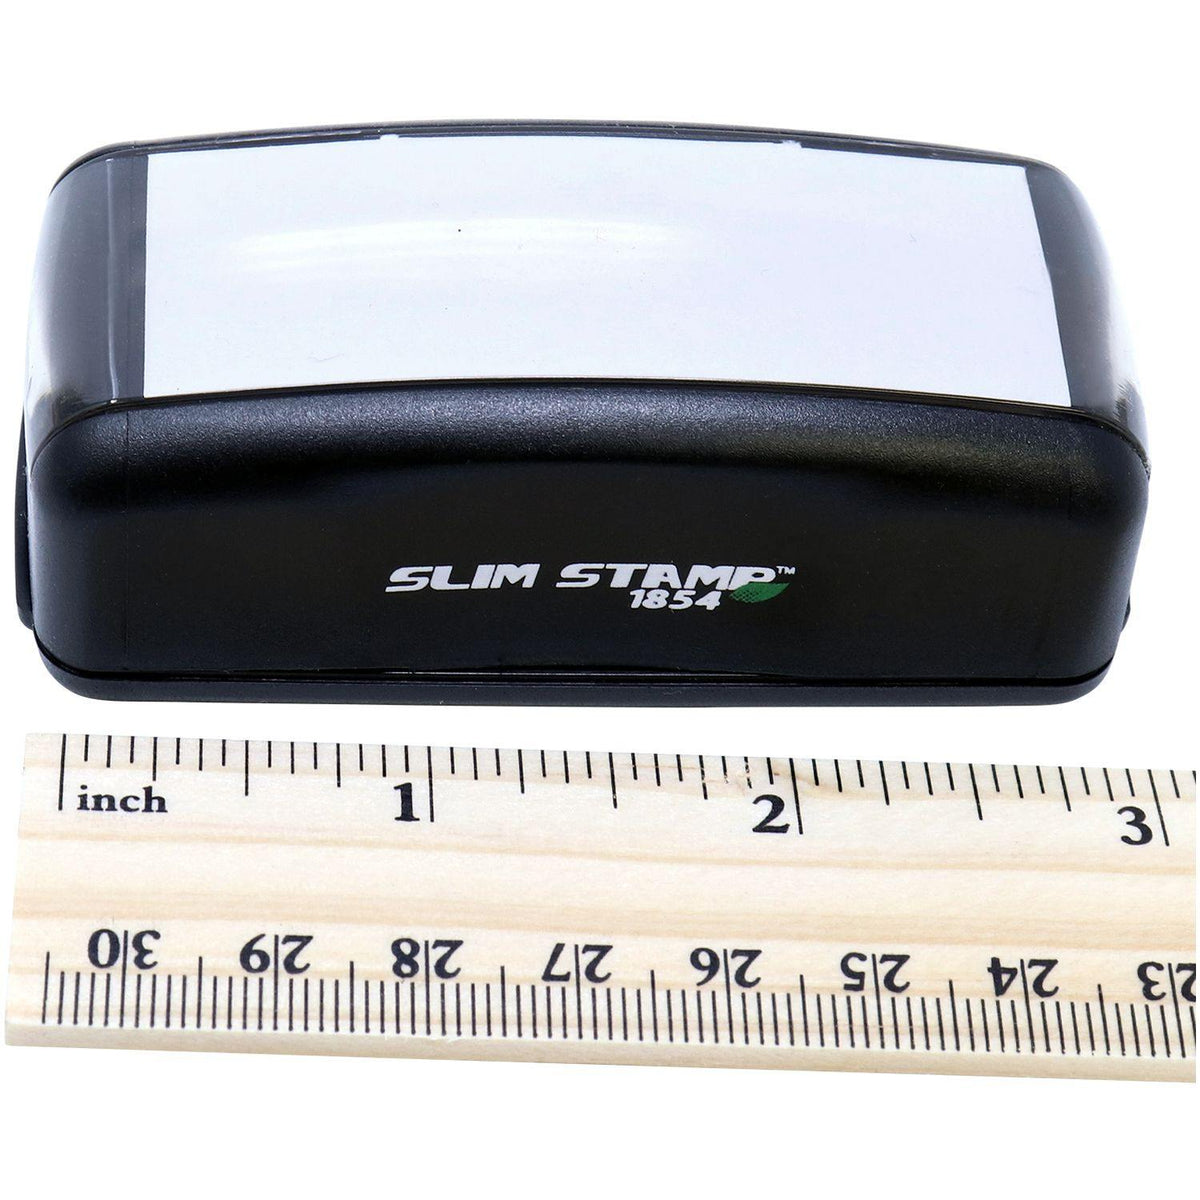 Measurement Large Pre-Inked Times Faxed Stamp with Ruler